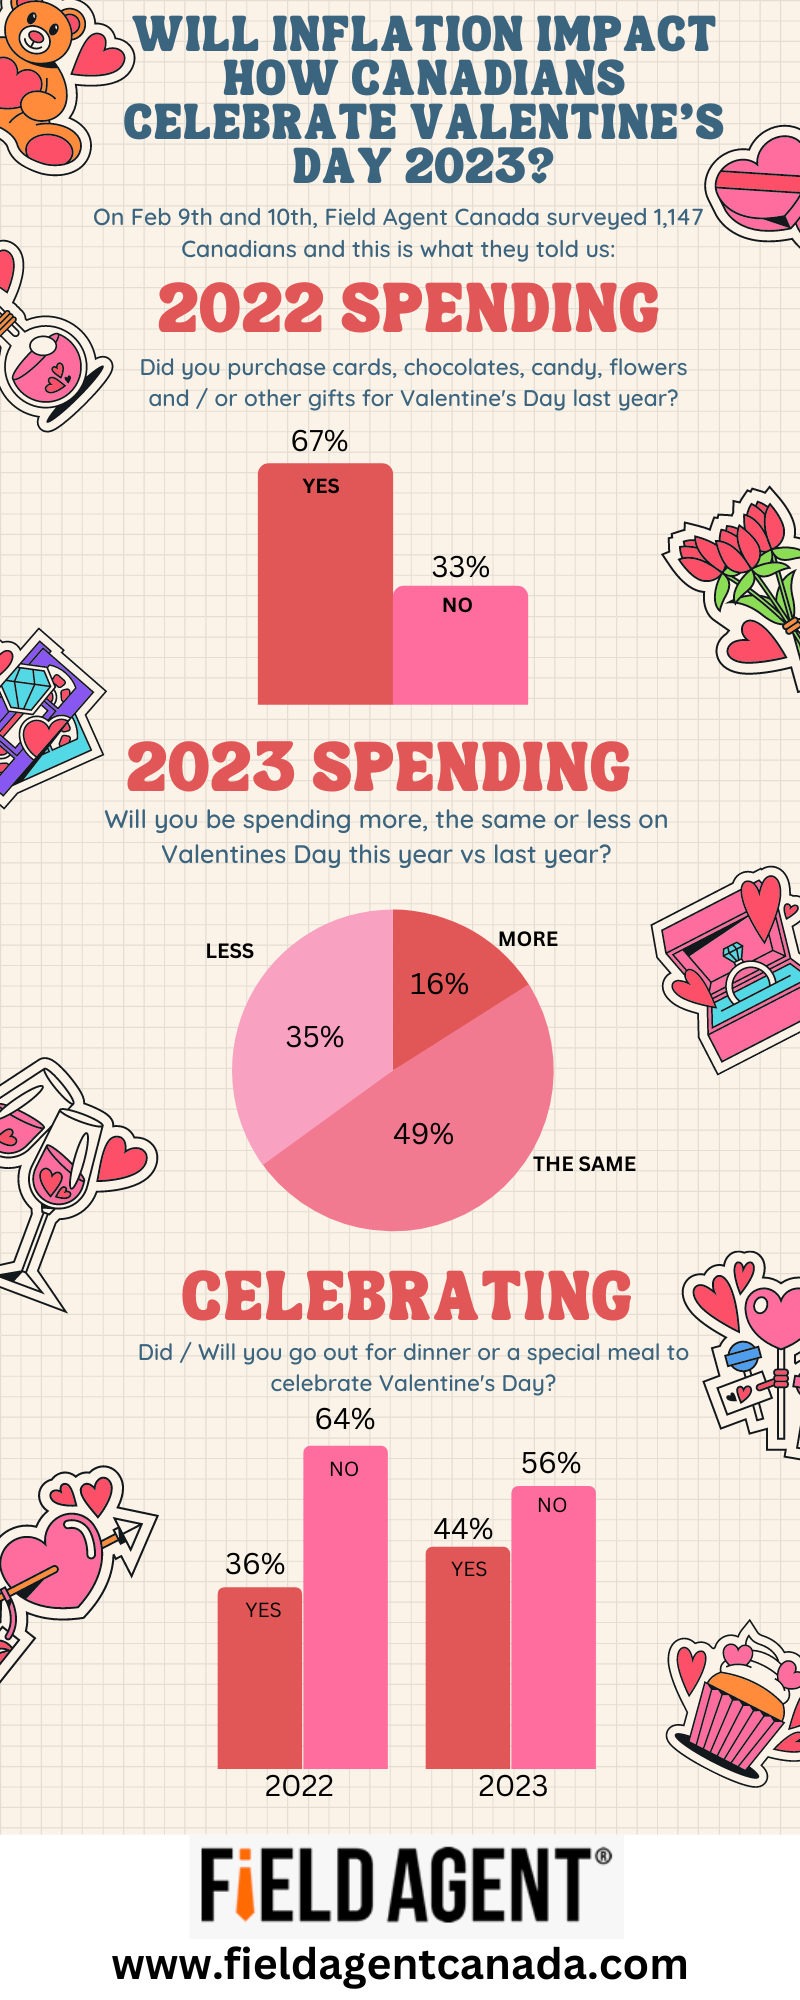 Will Inflation Impact How Canadians Celebrate Valentines Day 2023-2